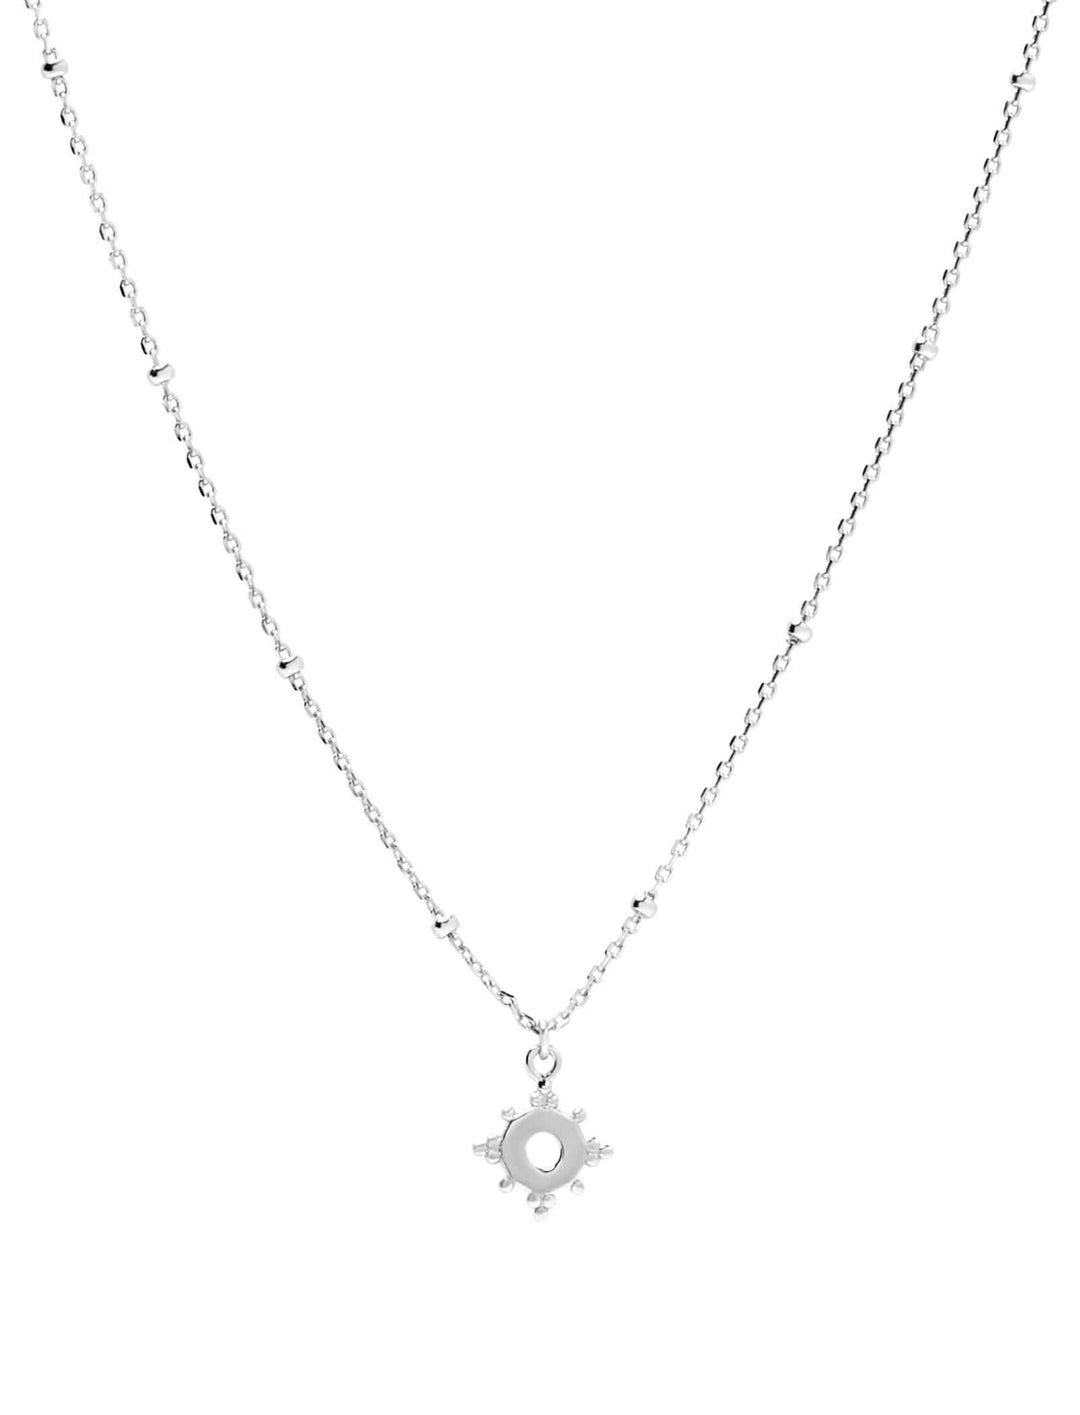 Twinkle Necklace - Silver